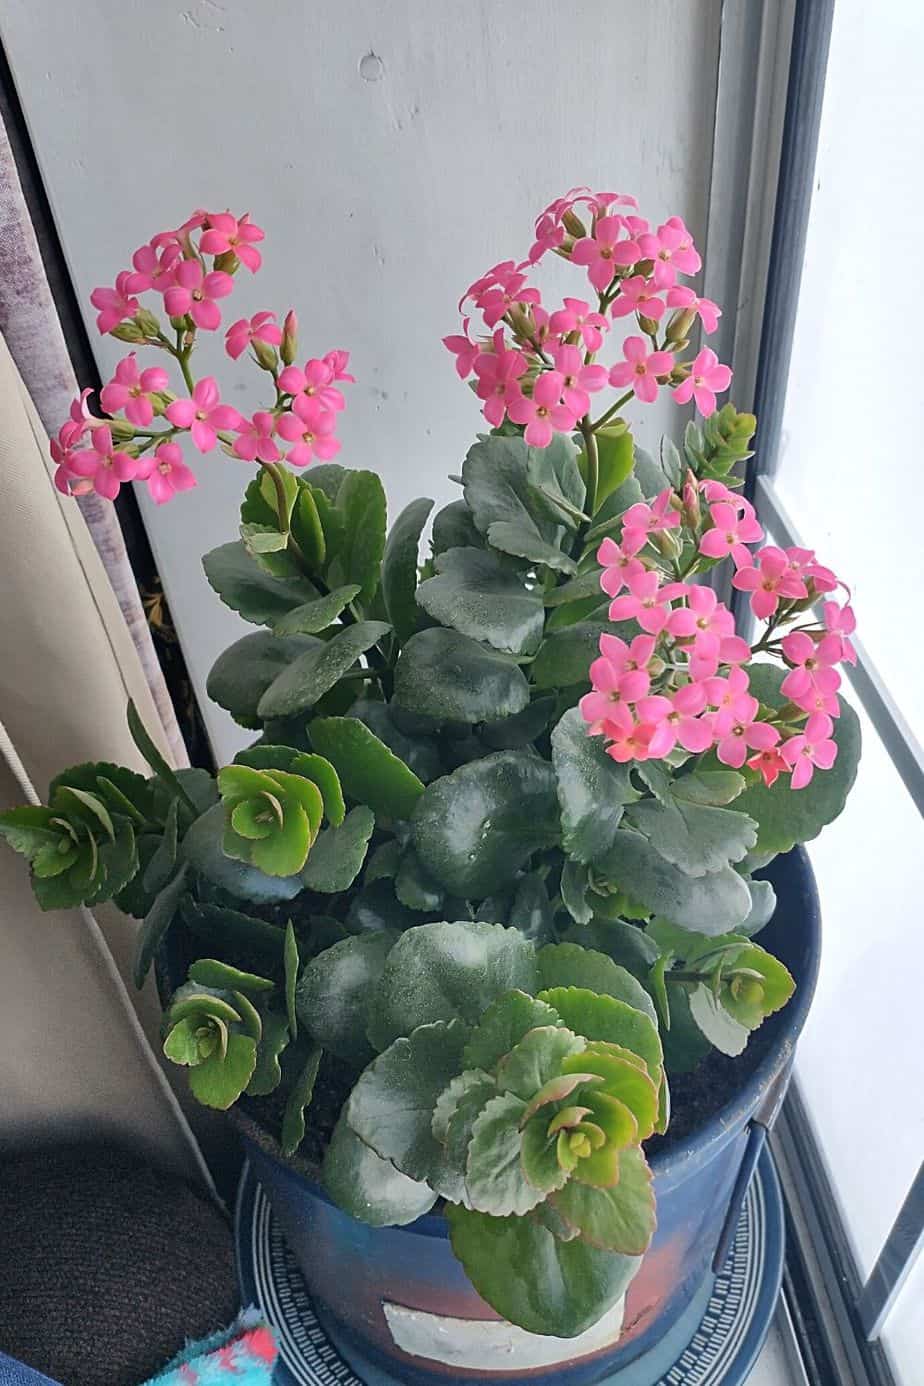 Kalanchoe is a flowering succulent that thrives in a southeast-facing window